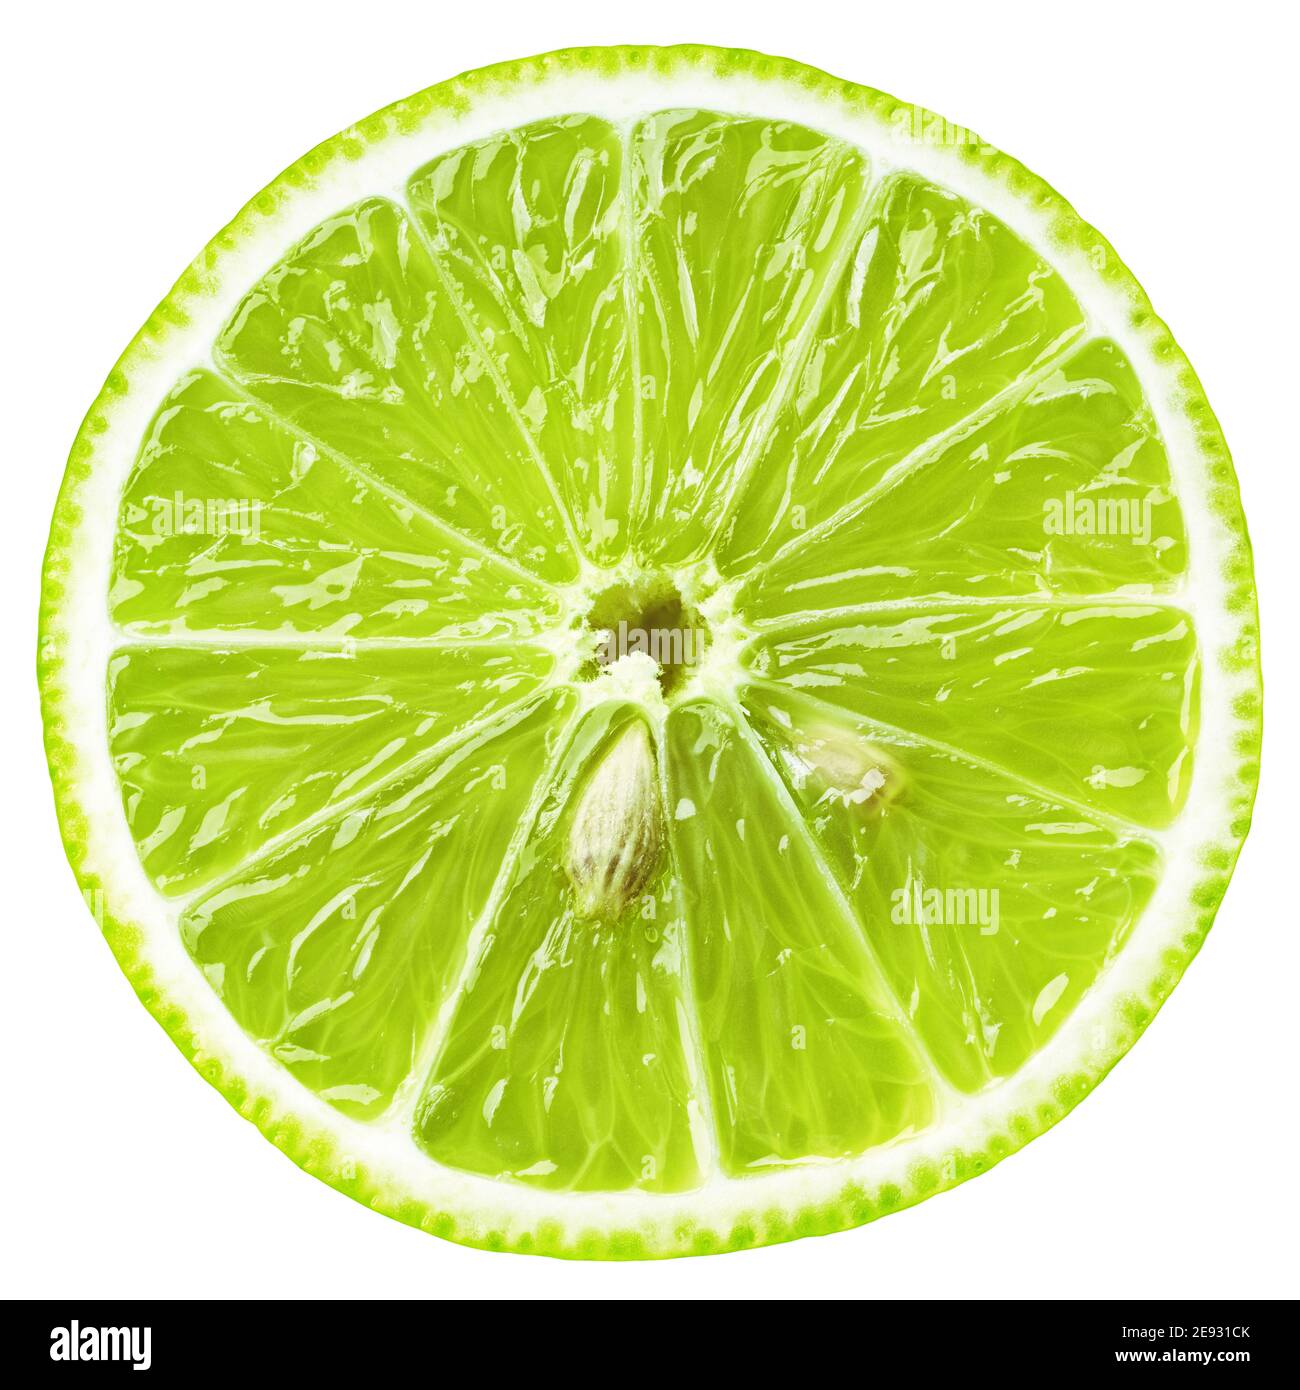 Top view of slice of lime citrus fruit isolated on white background with clipping path. Lime slice with seeds Stock Photo